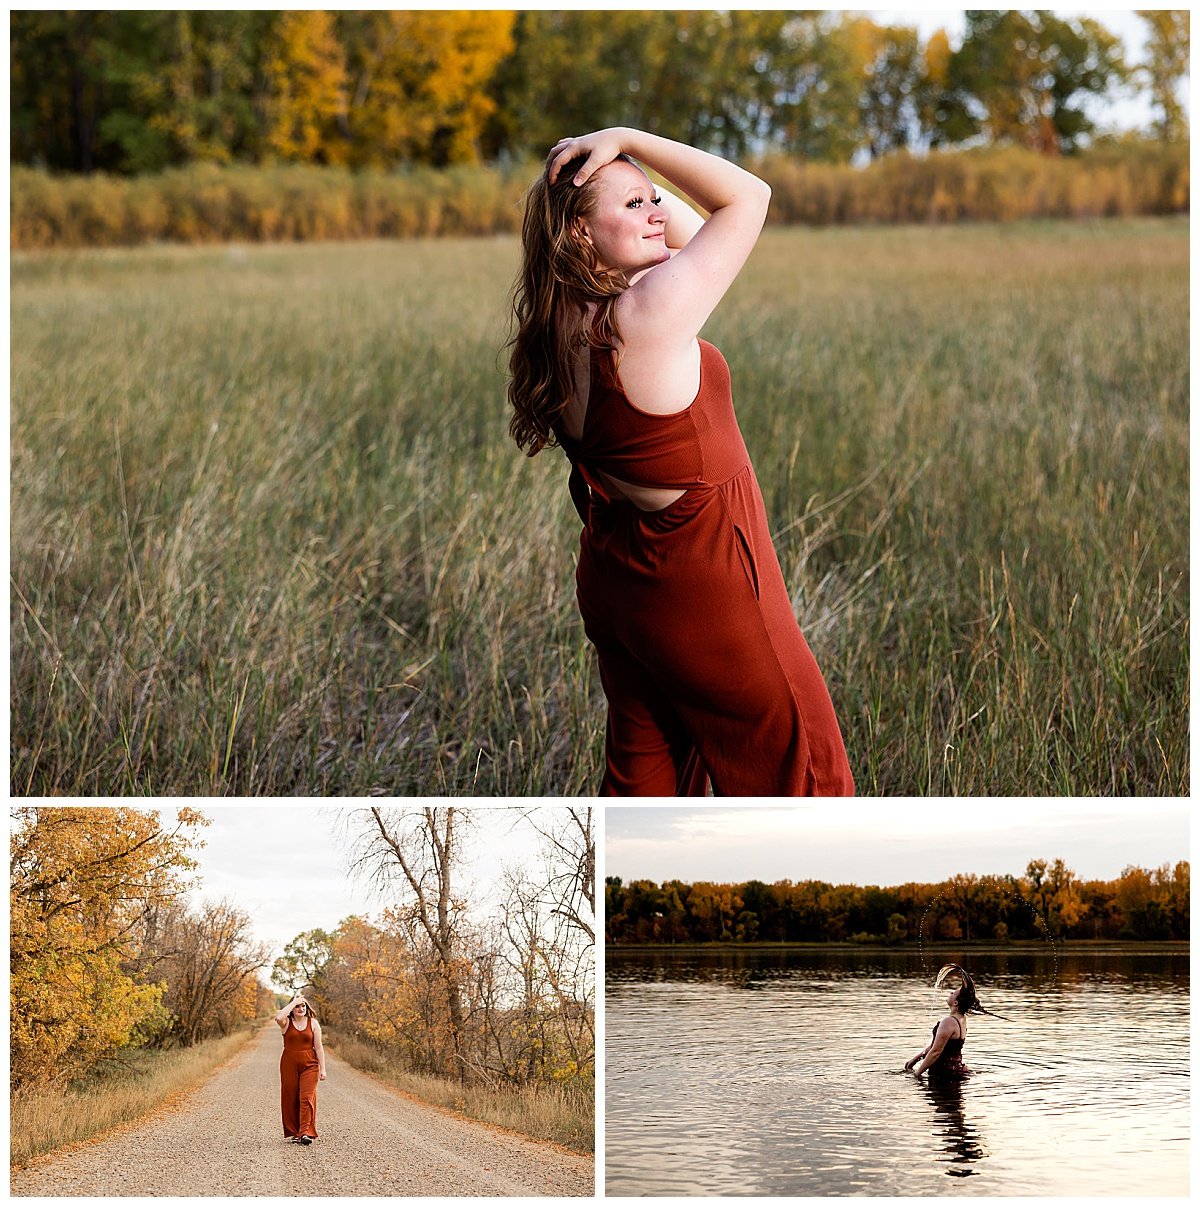 Fall Senior Pictures by Kellie Rochelle Photography, a senior photographer based in Williston, North Dakota.